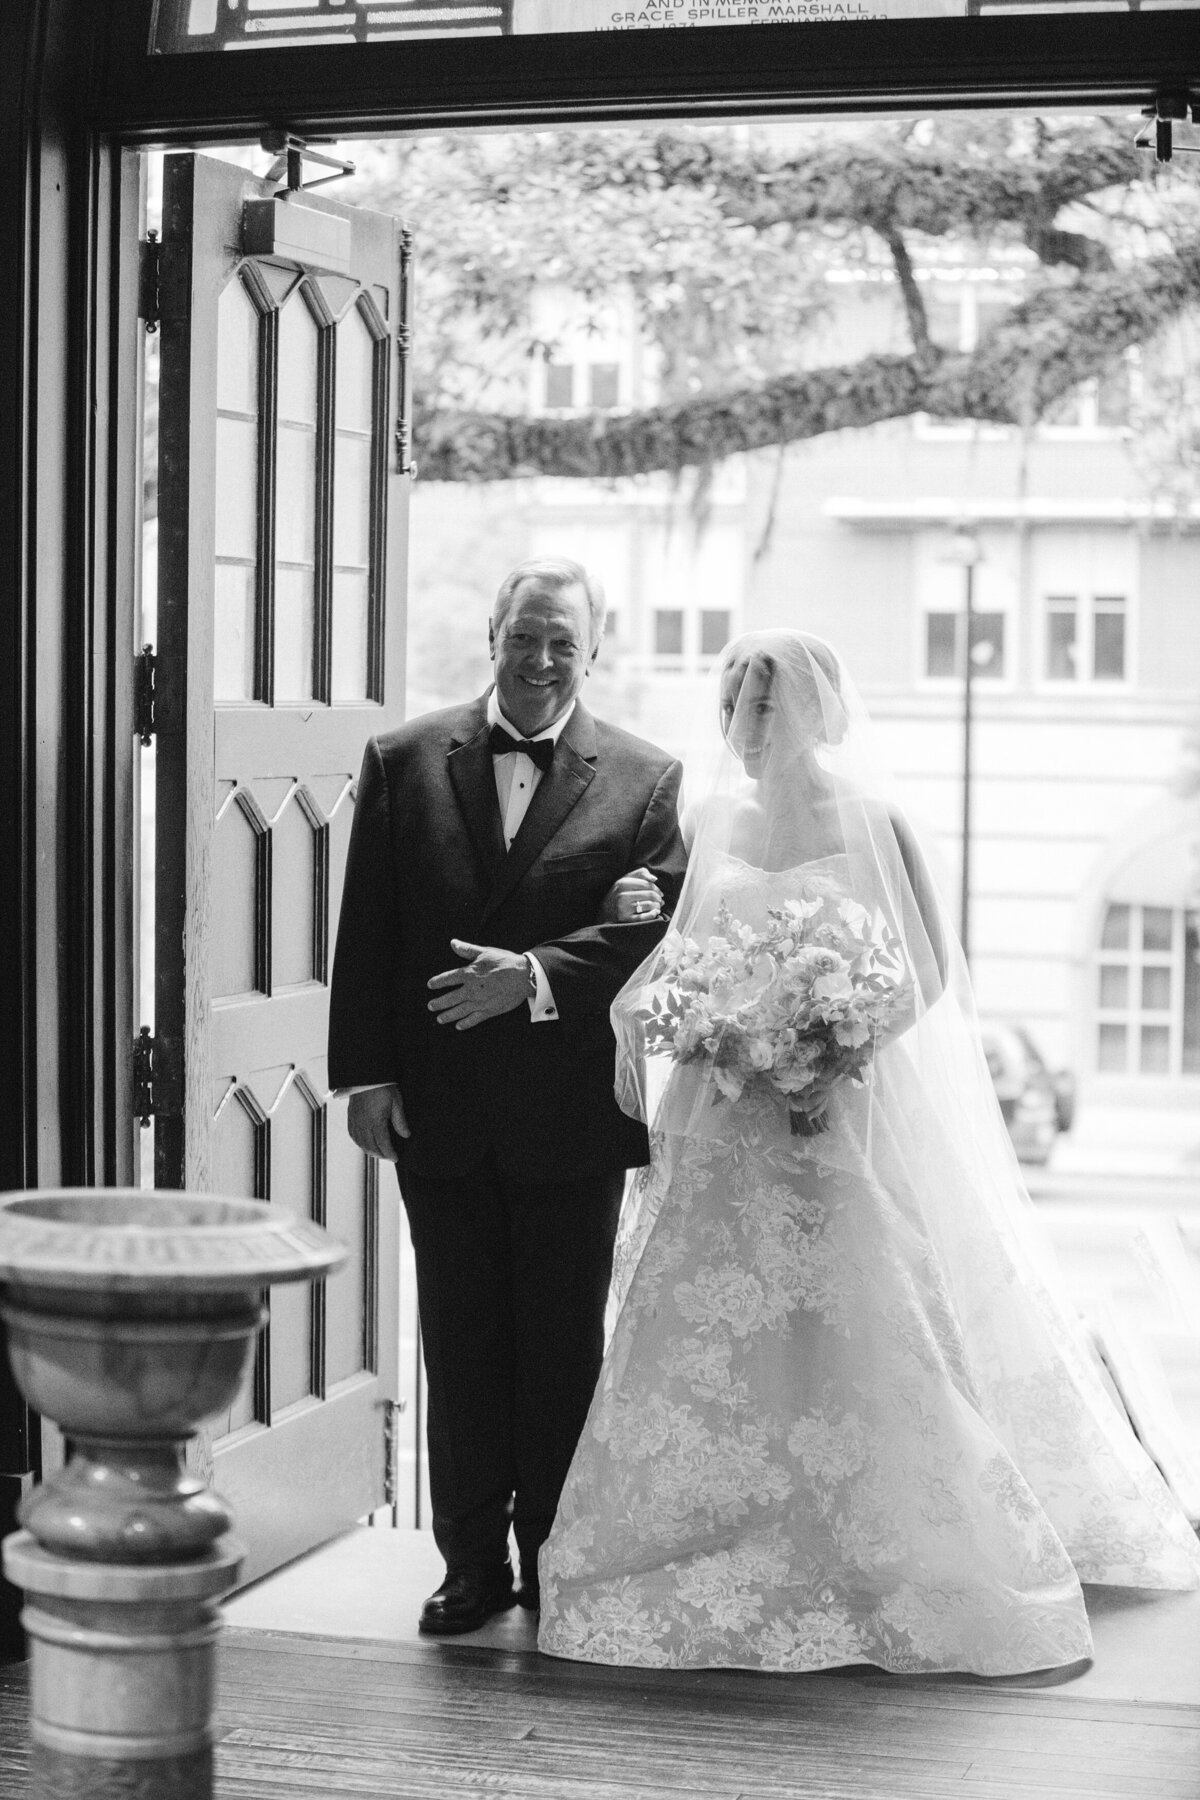 A wedding ceremony at St. John's Episcopal Church in Tallahassee, FL - 1